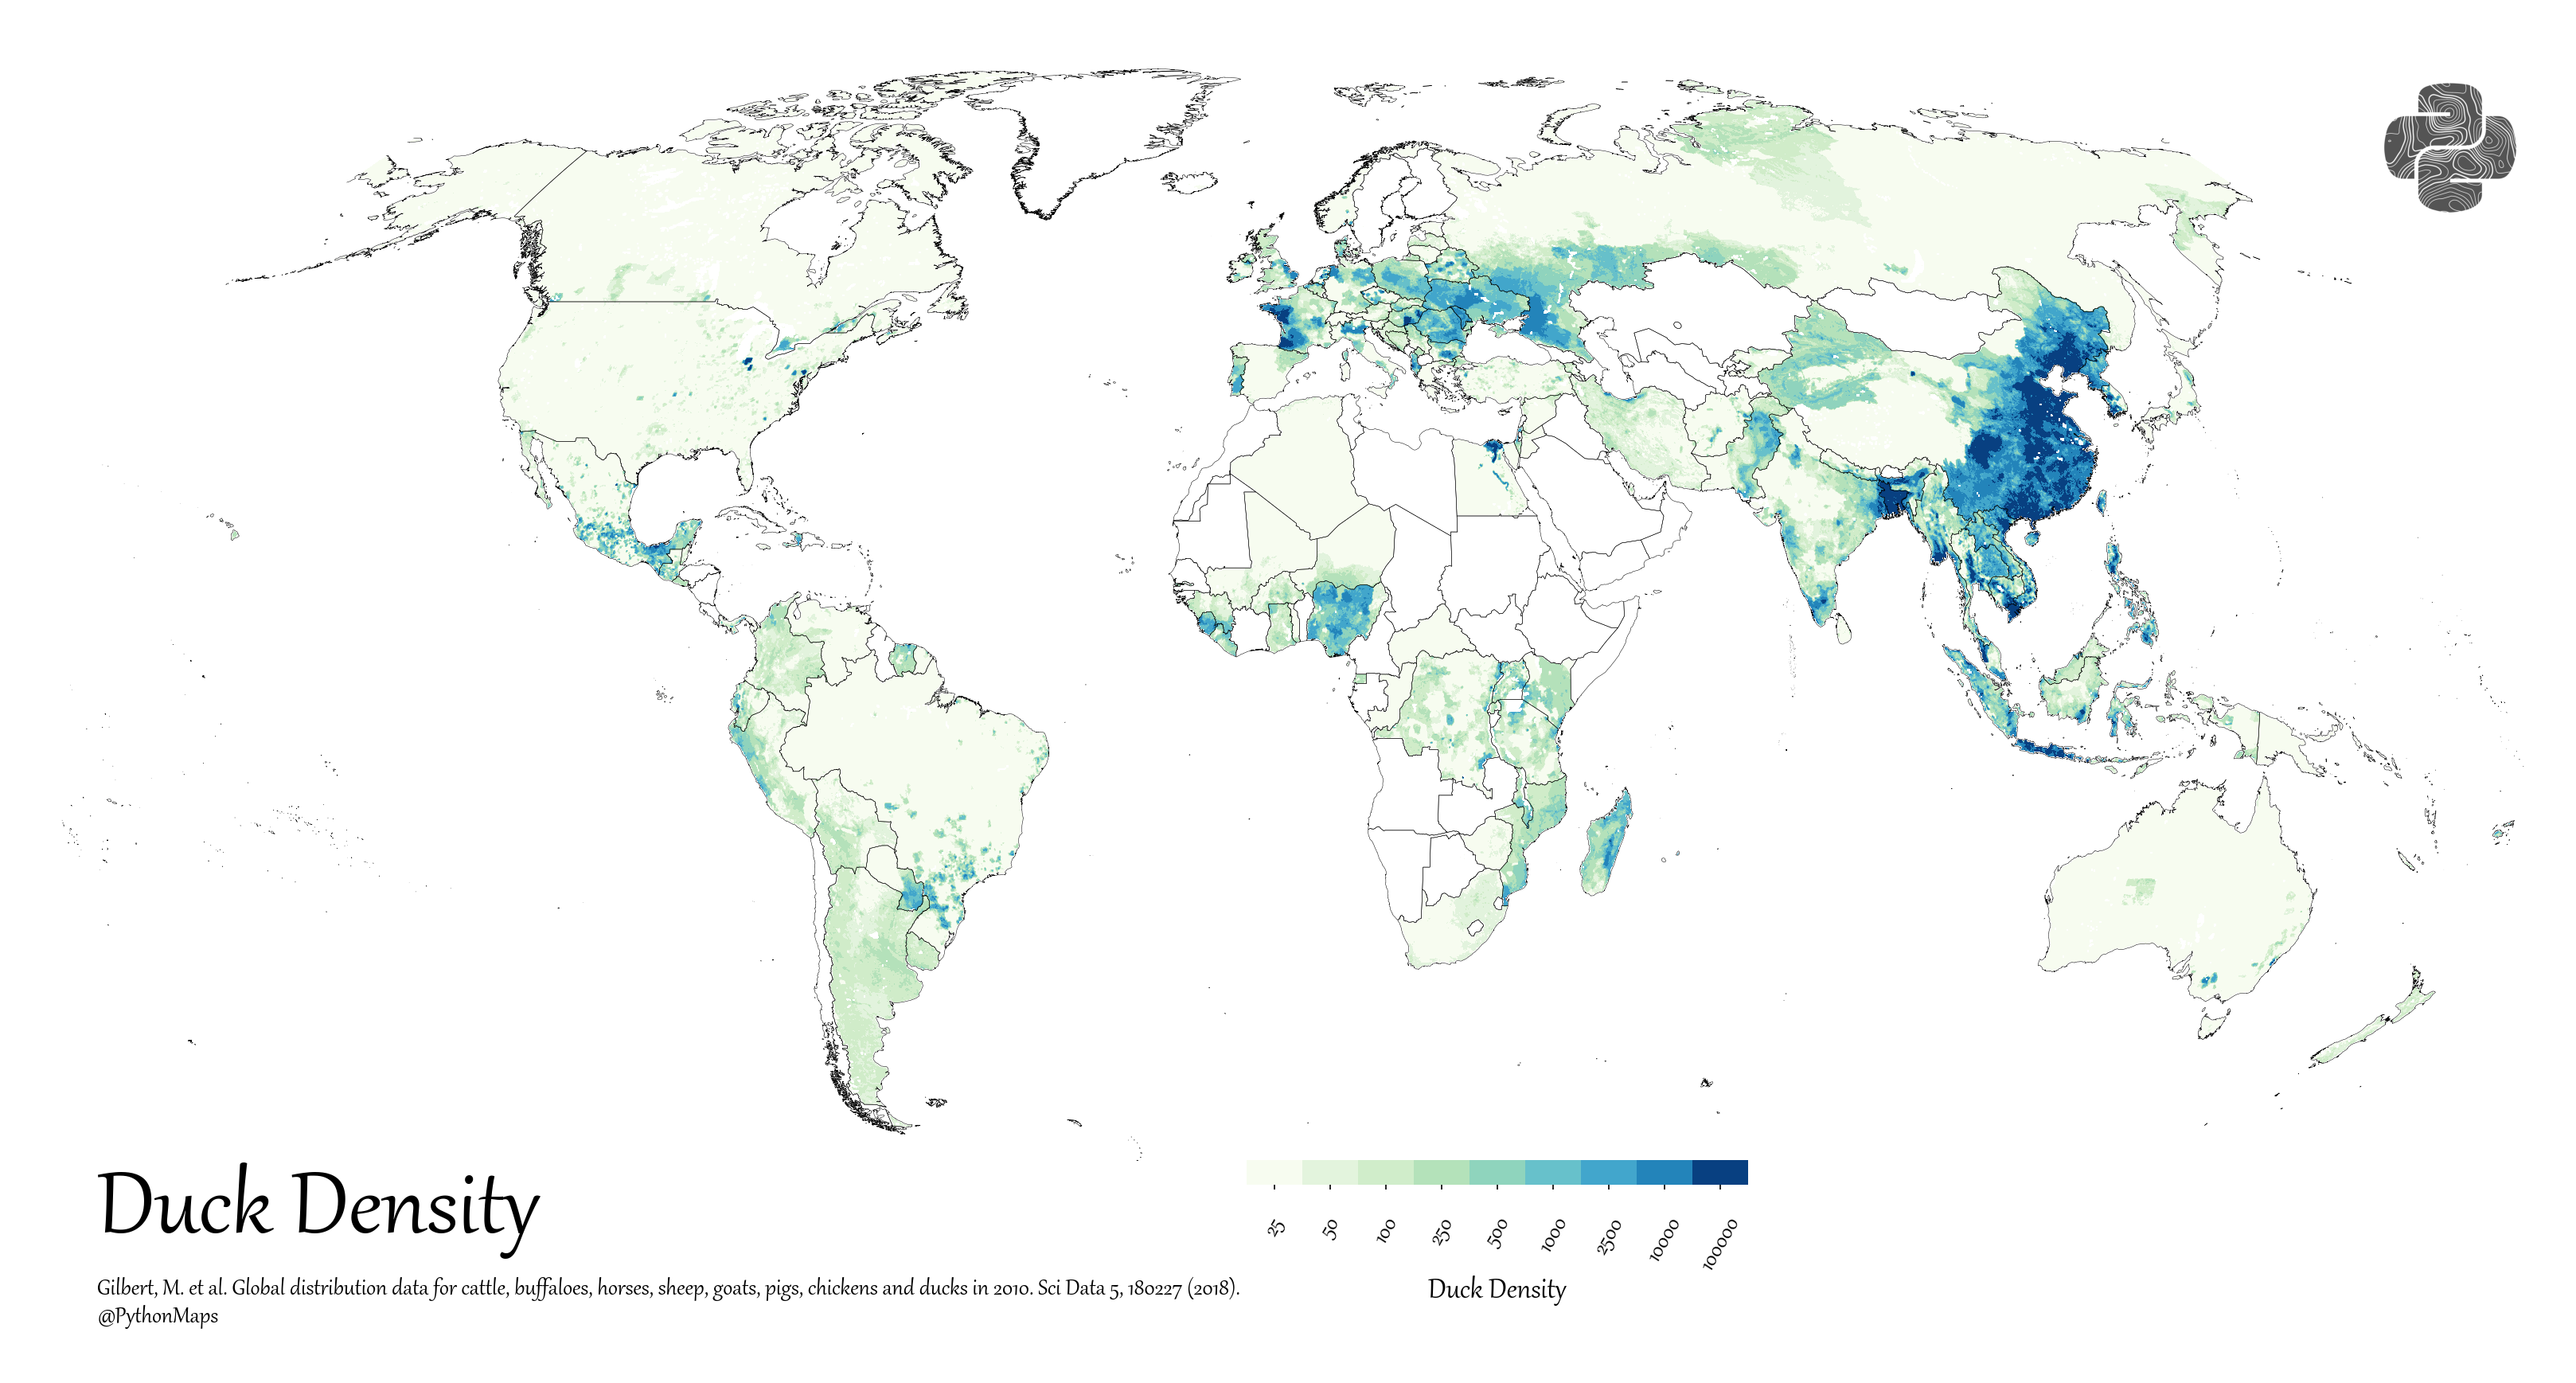 A map of livestock distribution, specifically ducks, in the world.